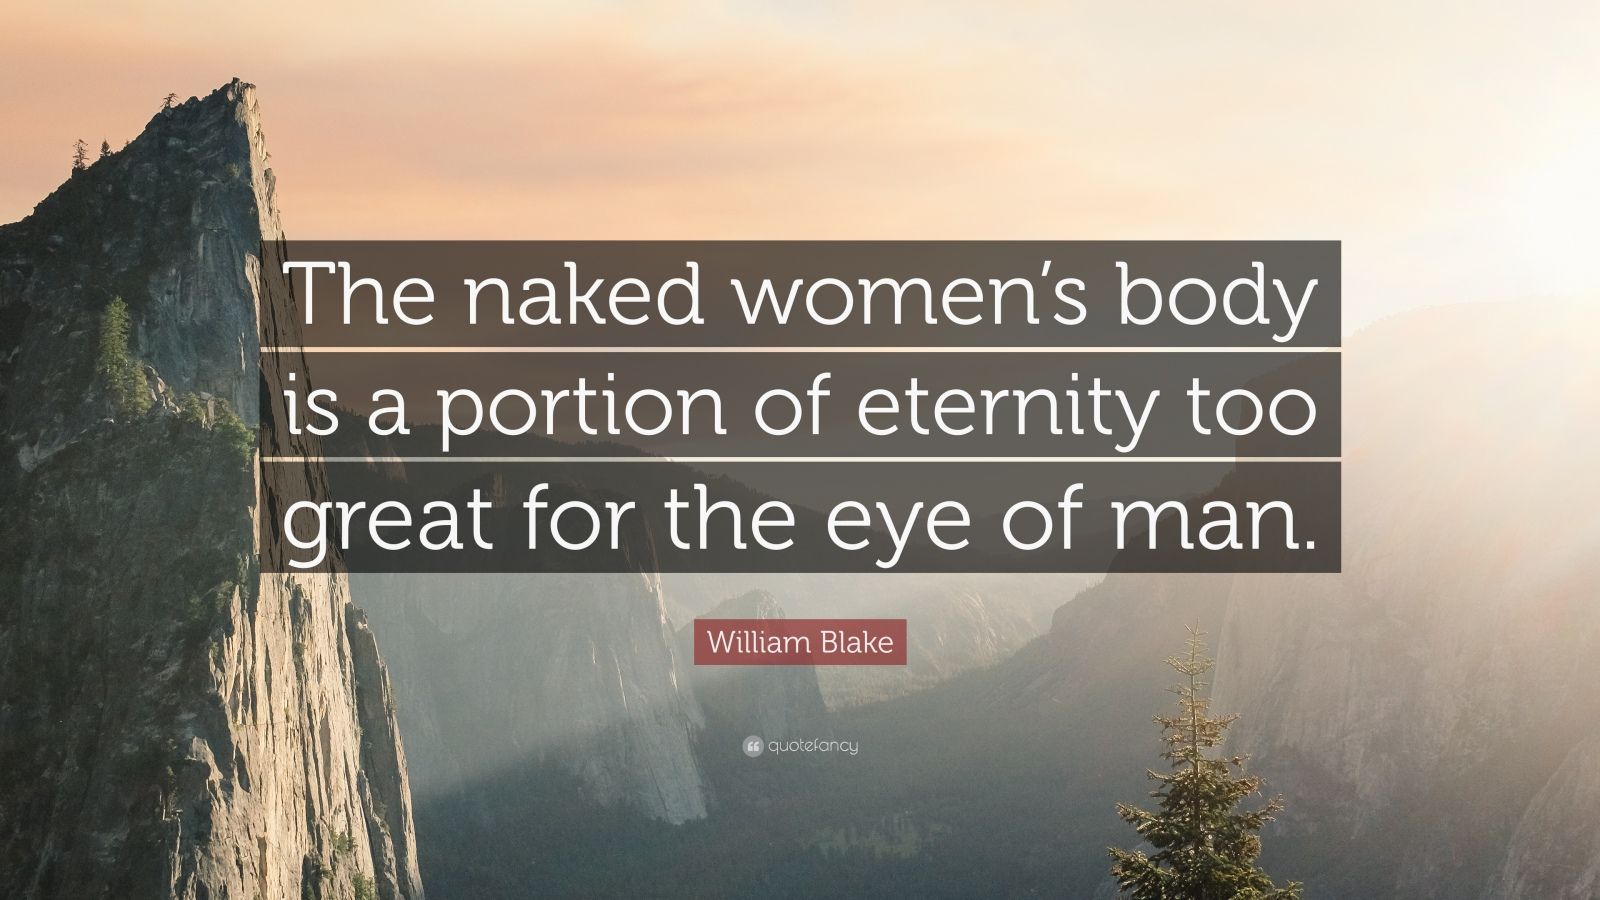 William Blake Quote: “The naked women’s body is a portion of eternity ...